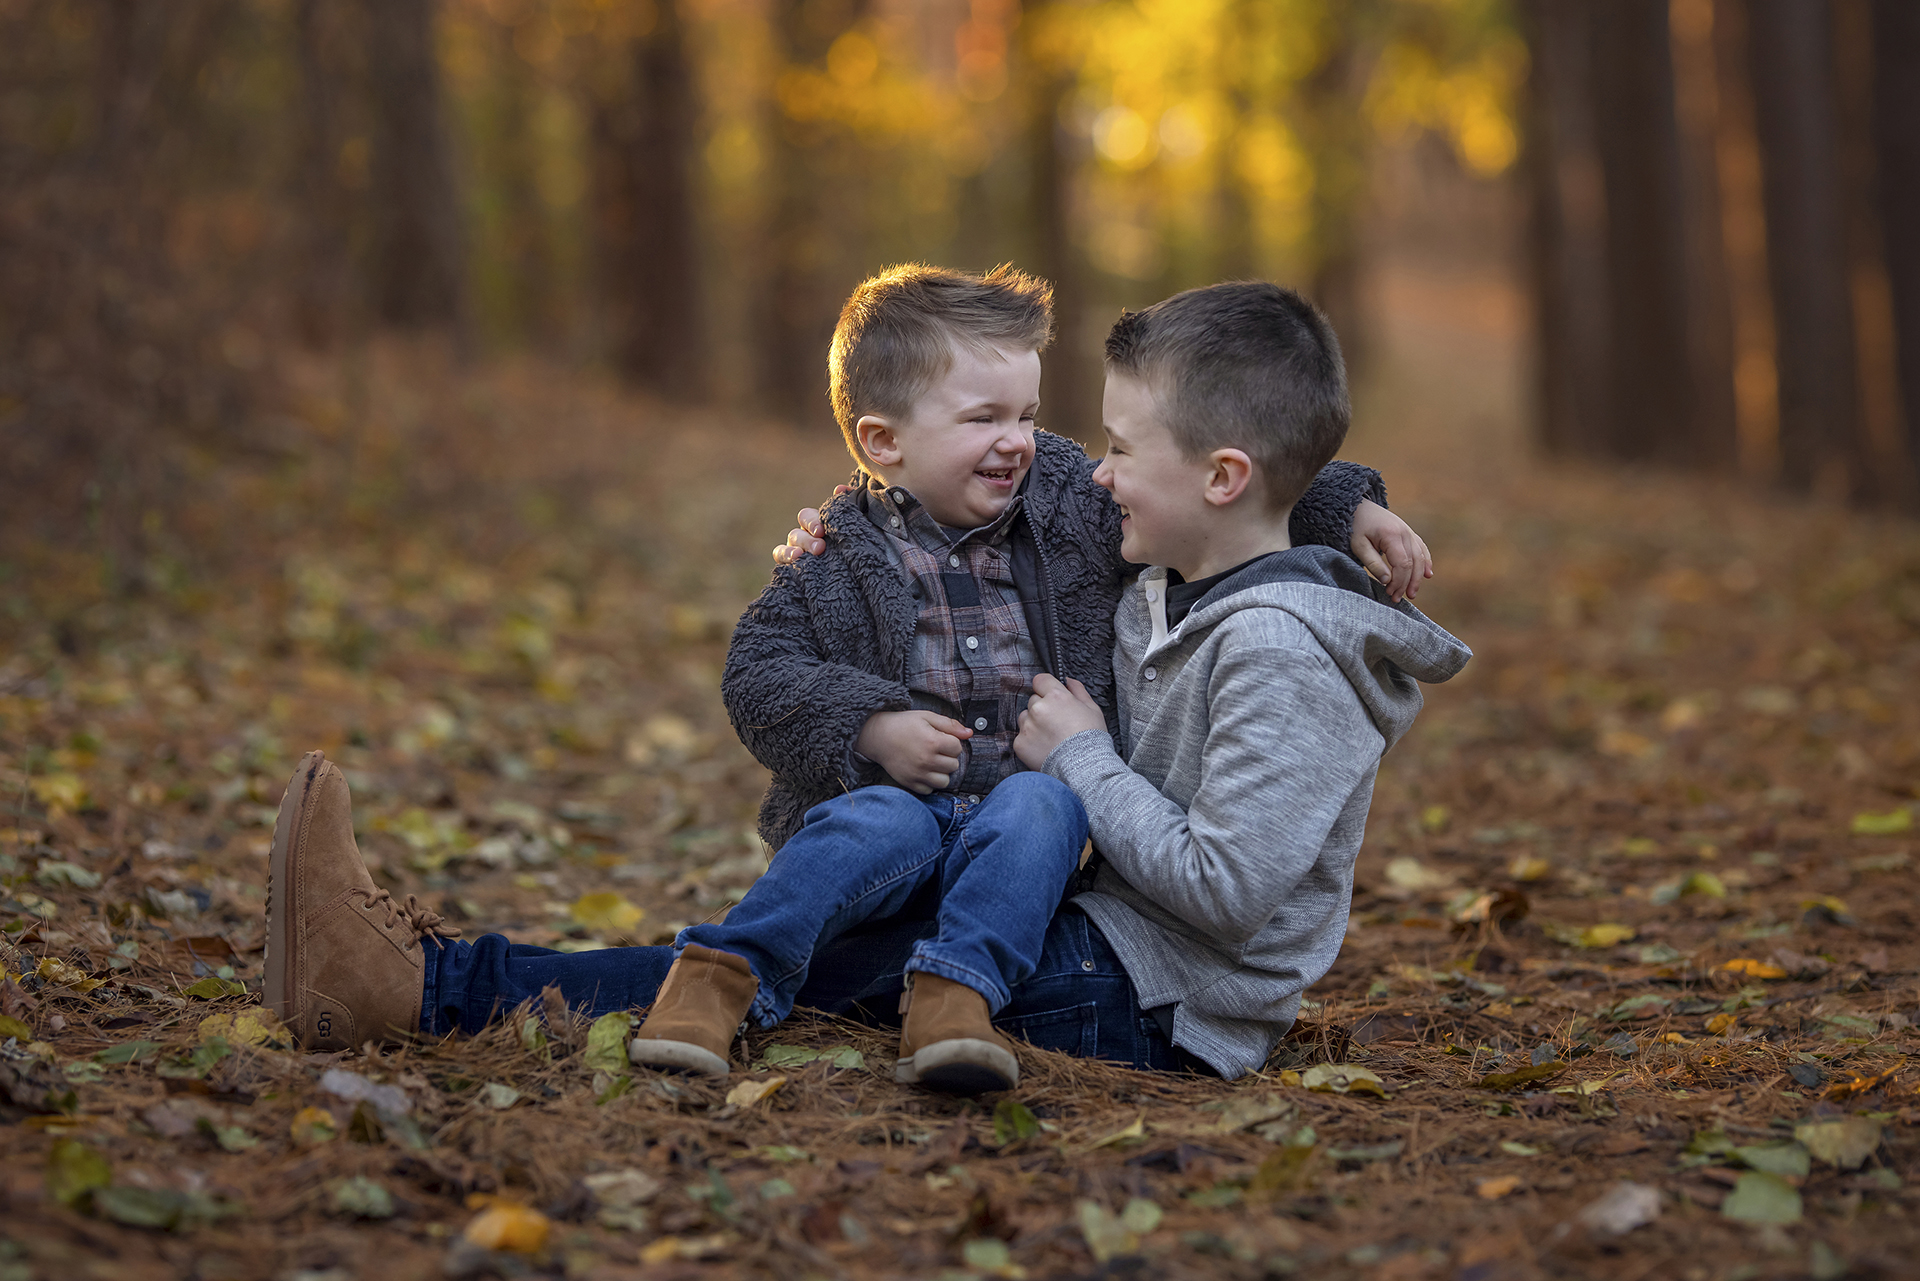 Two young sibling boys sit with each other among autumn leaves and laugh during a Detroit photoshoot.